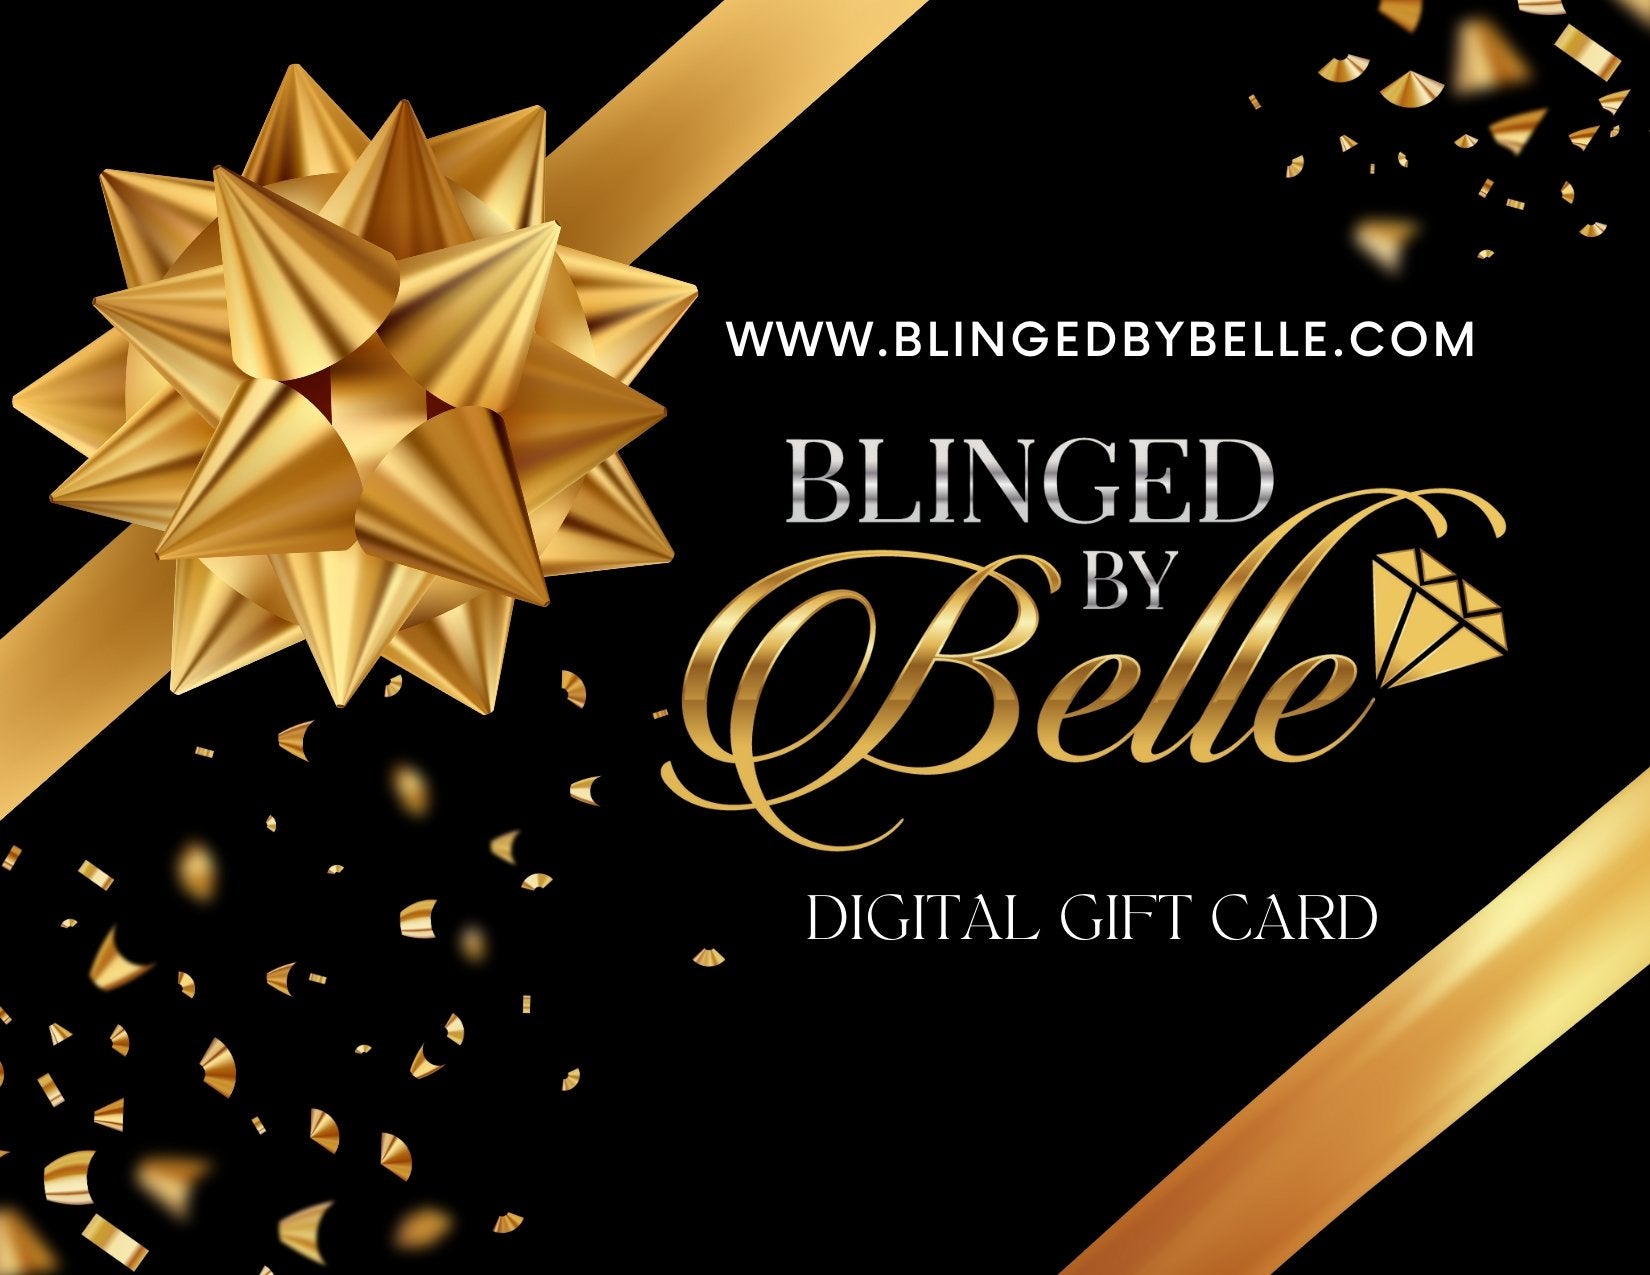 Binged By Belle Digital Gift Card $5 up tp $100 - Blinged by Belle